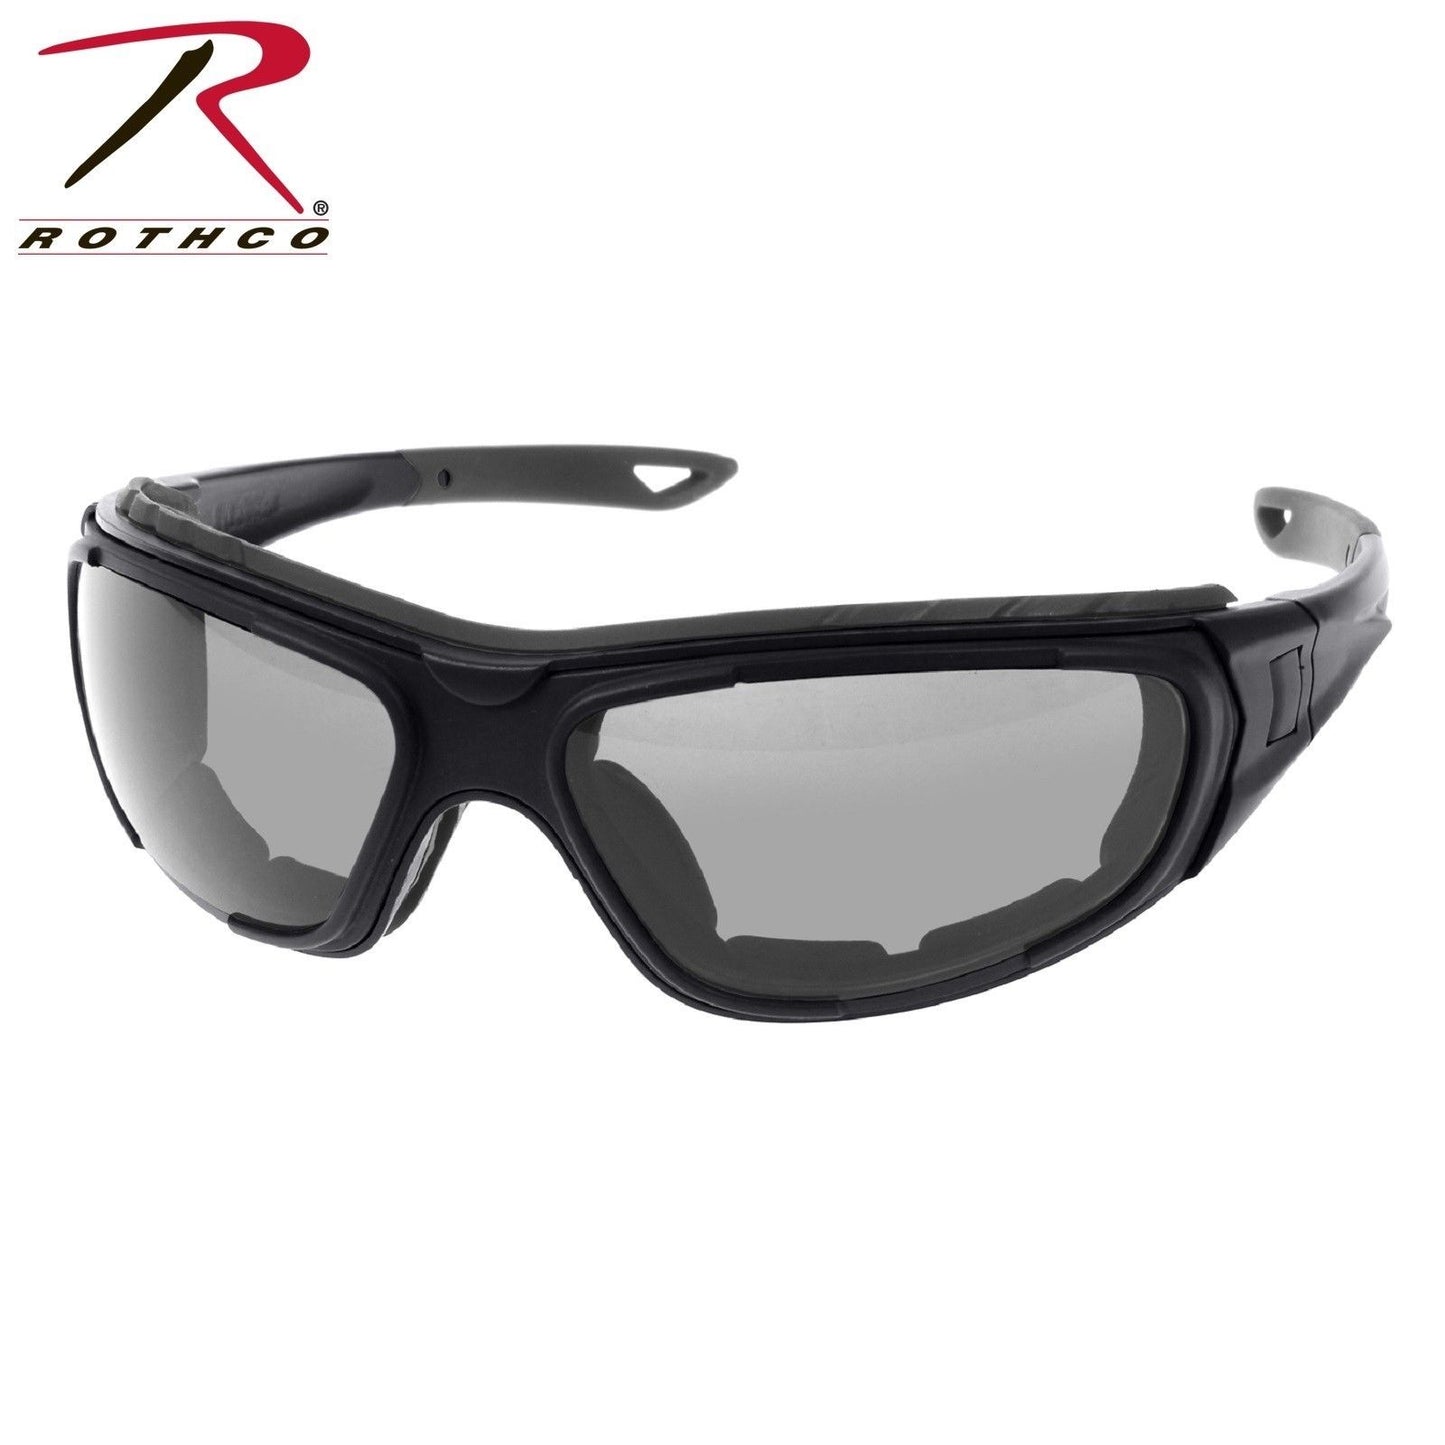 Rothco Interchangeable Optical System - UV400 Protection Sunglasses/Goggles